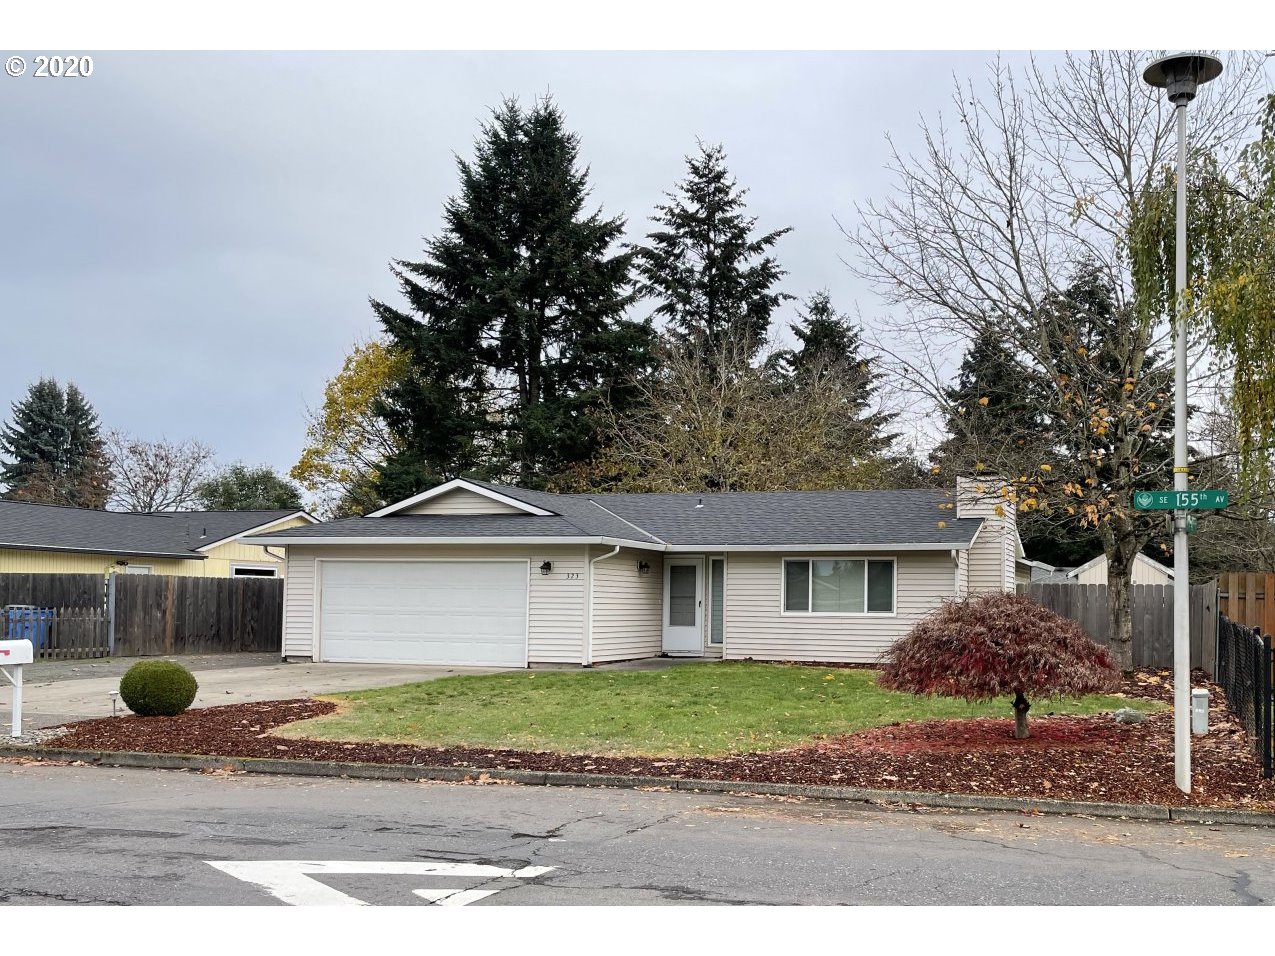 323 SE 155TH AVE (1 of 13)